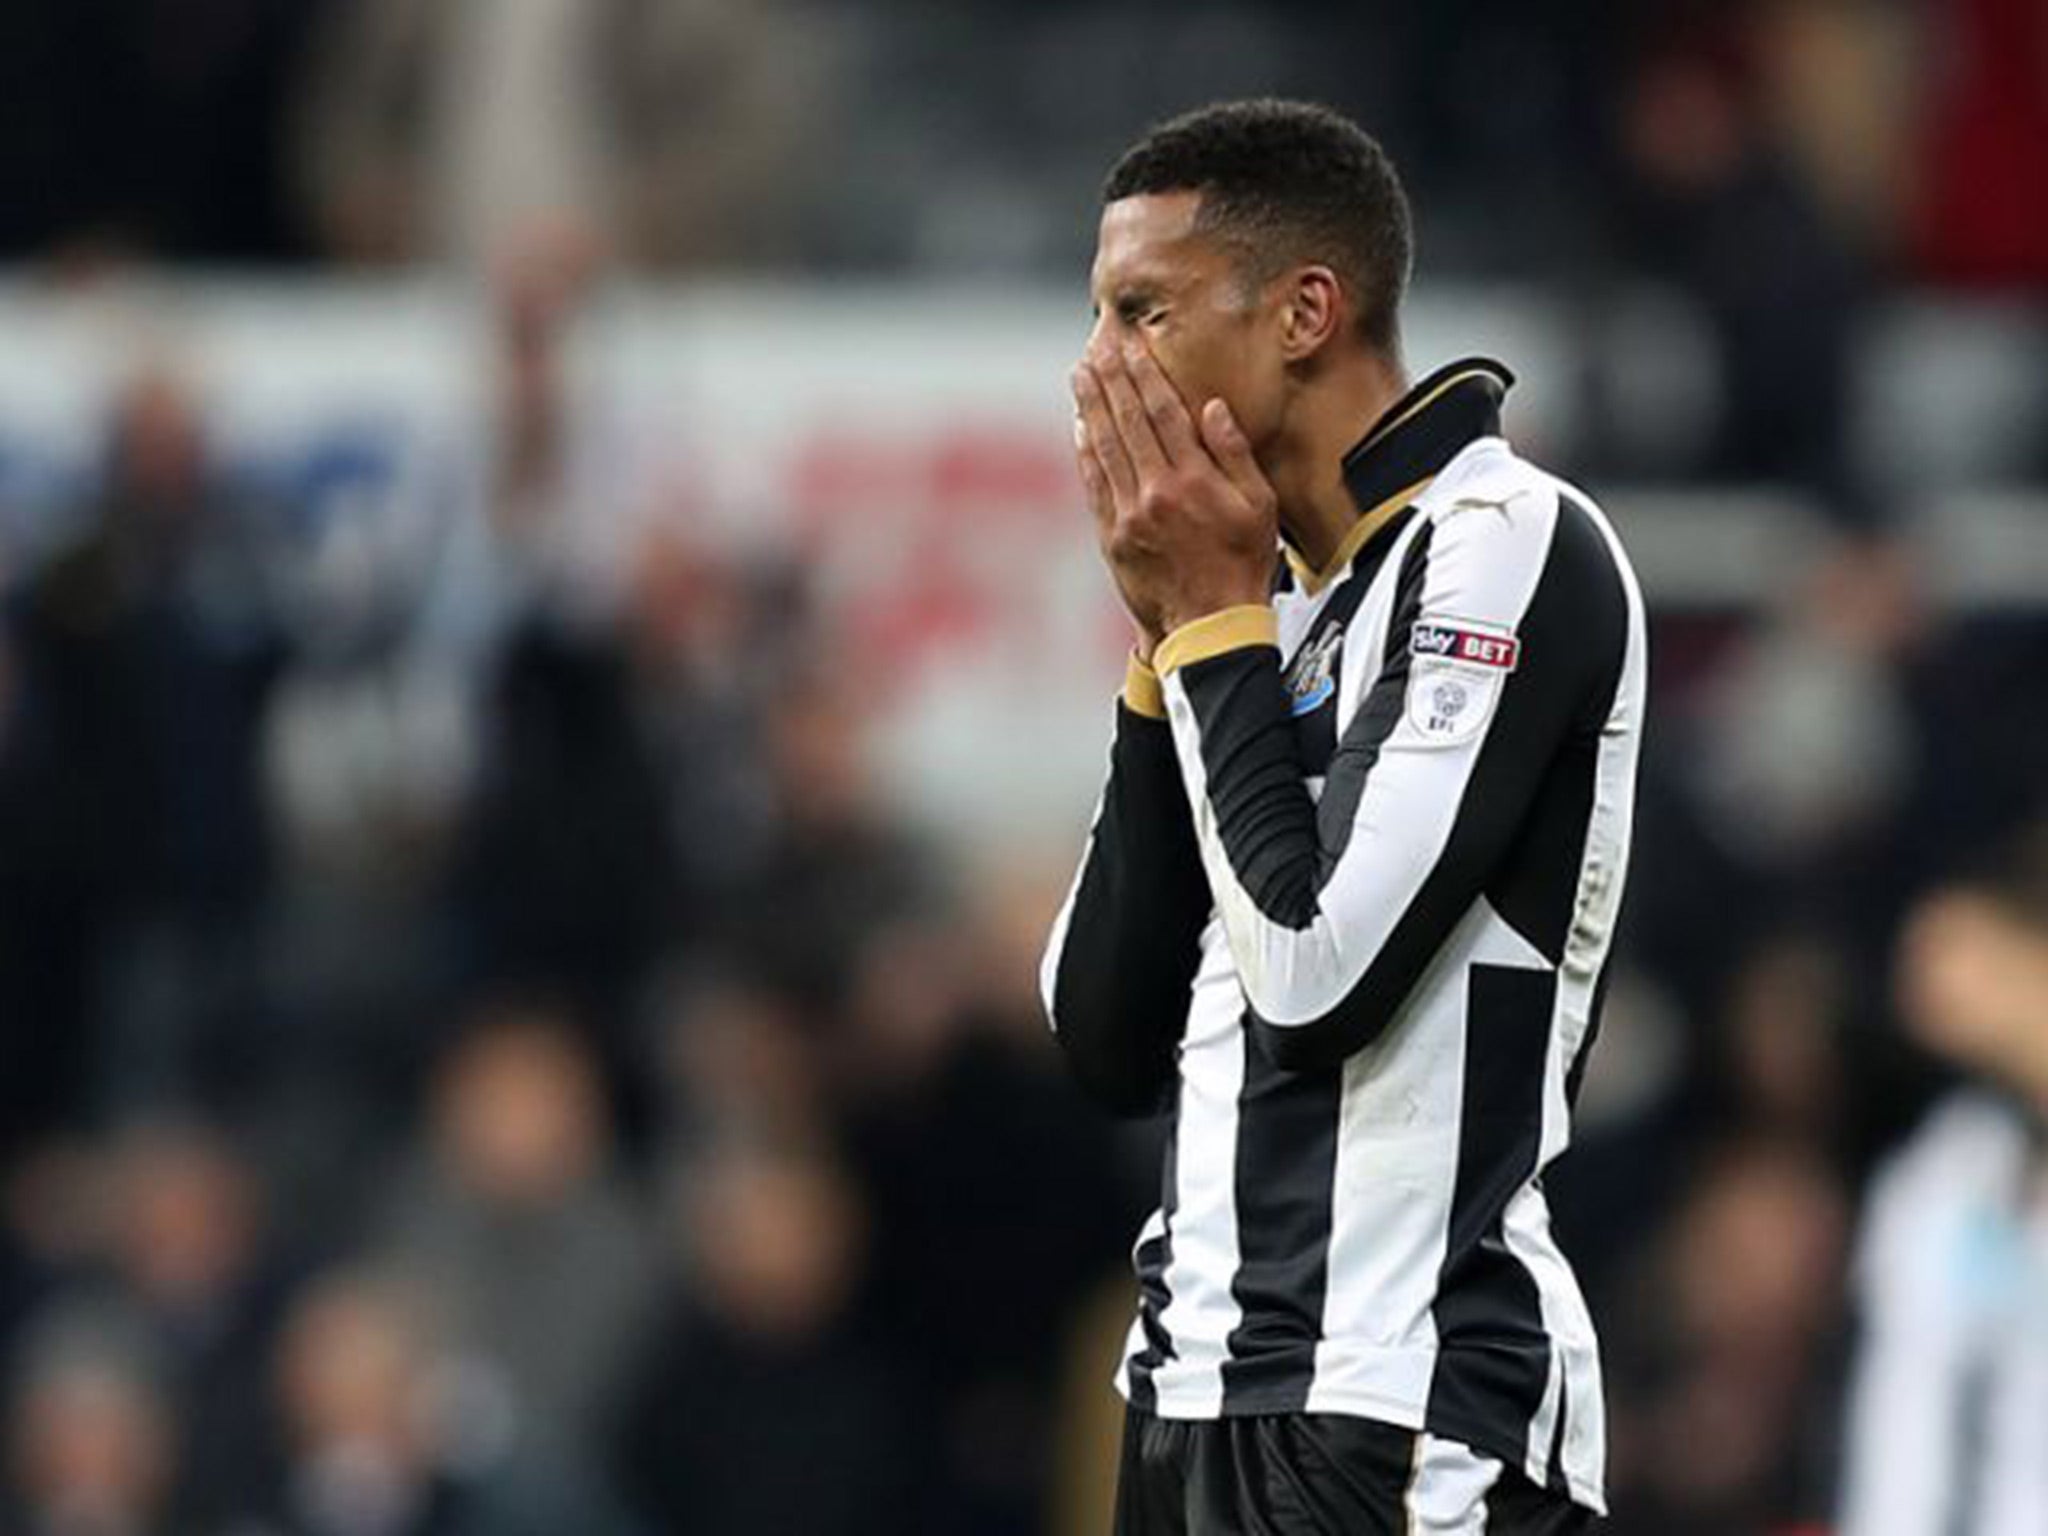 Newcastle missed the opportunity to win a 10th straight game